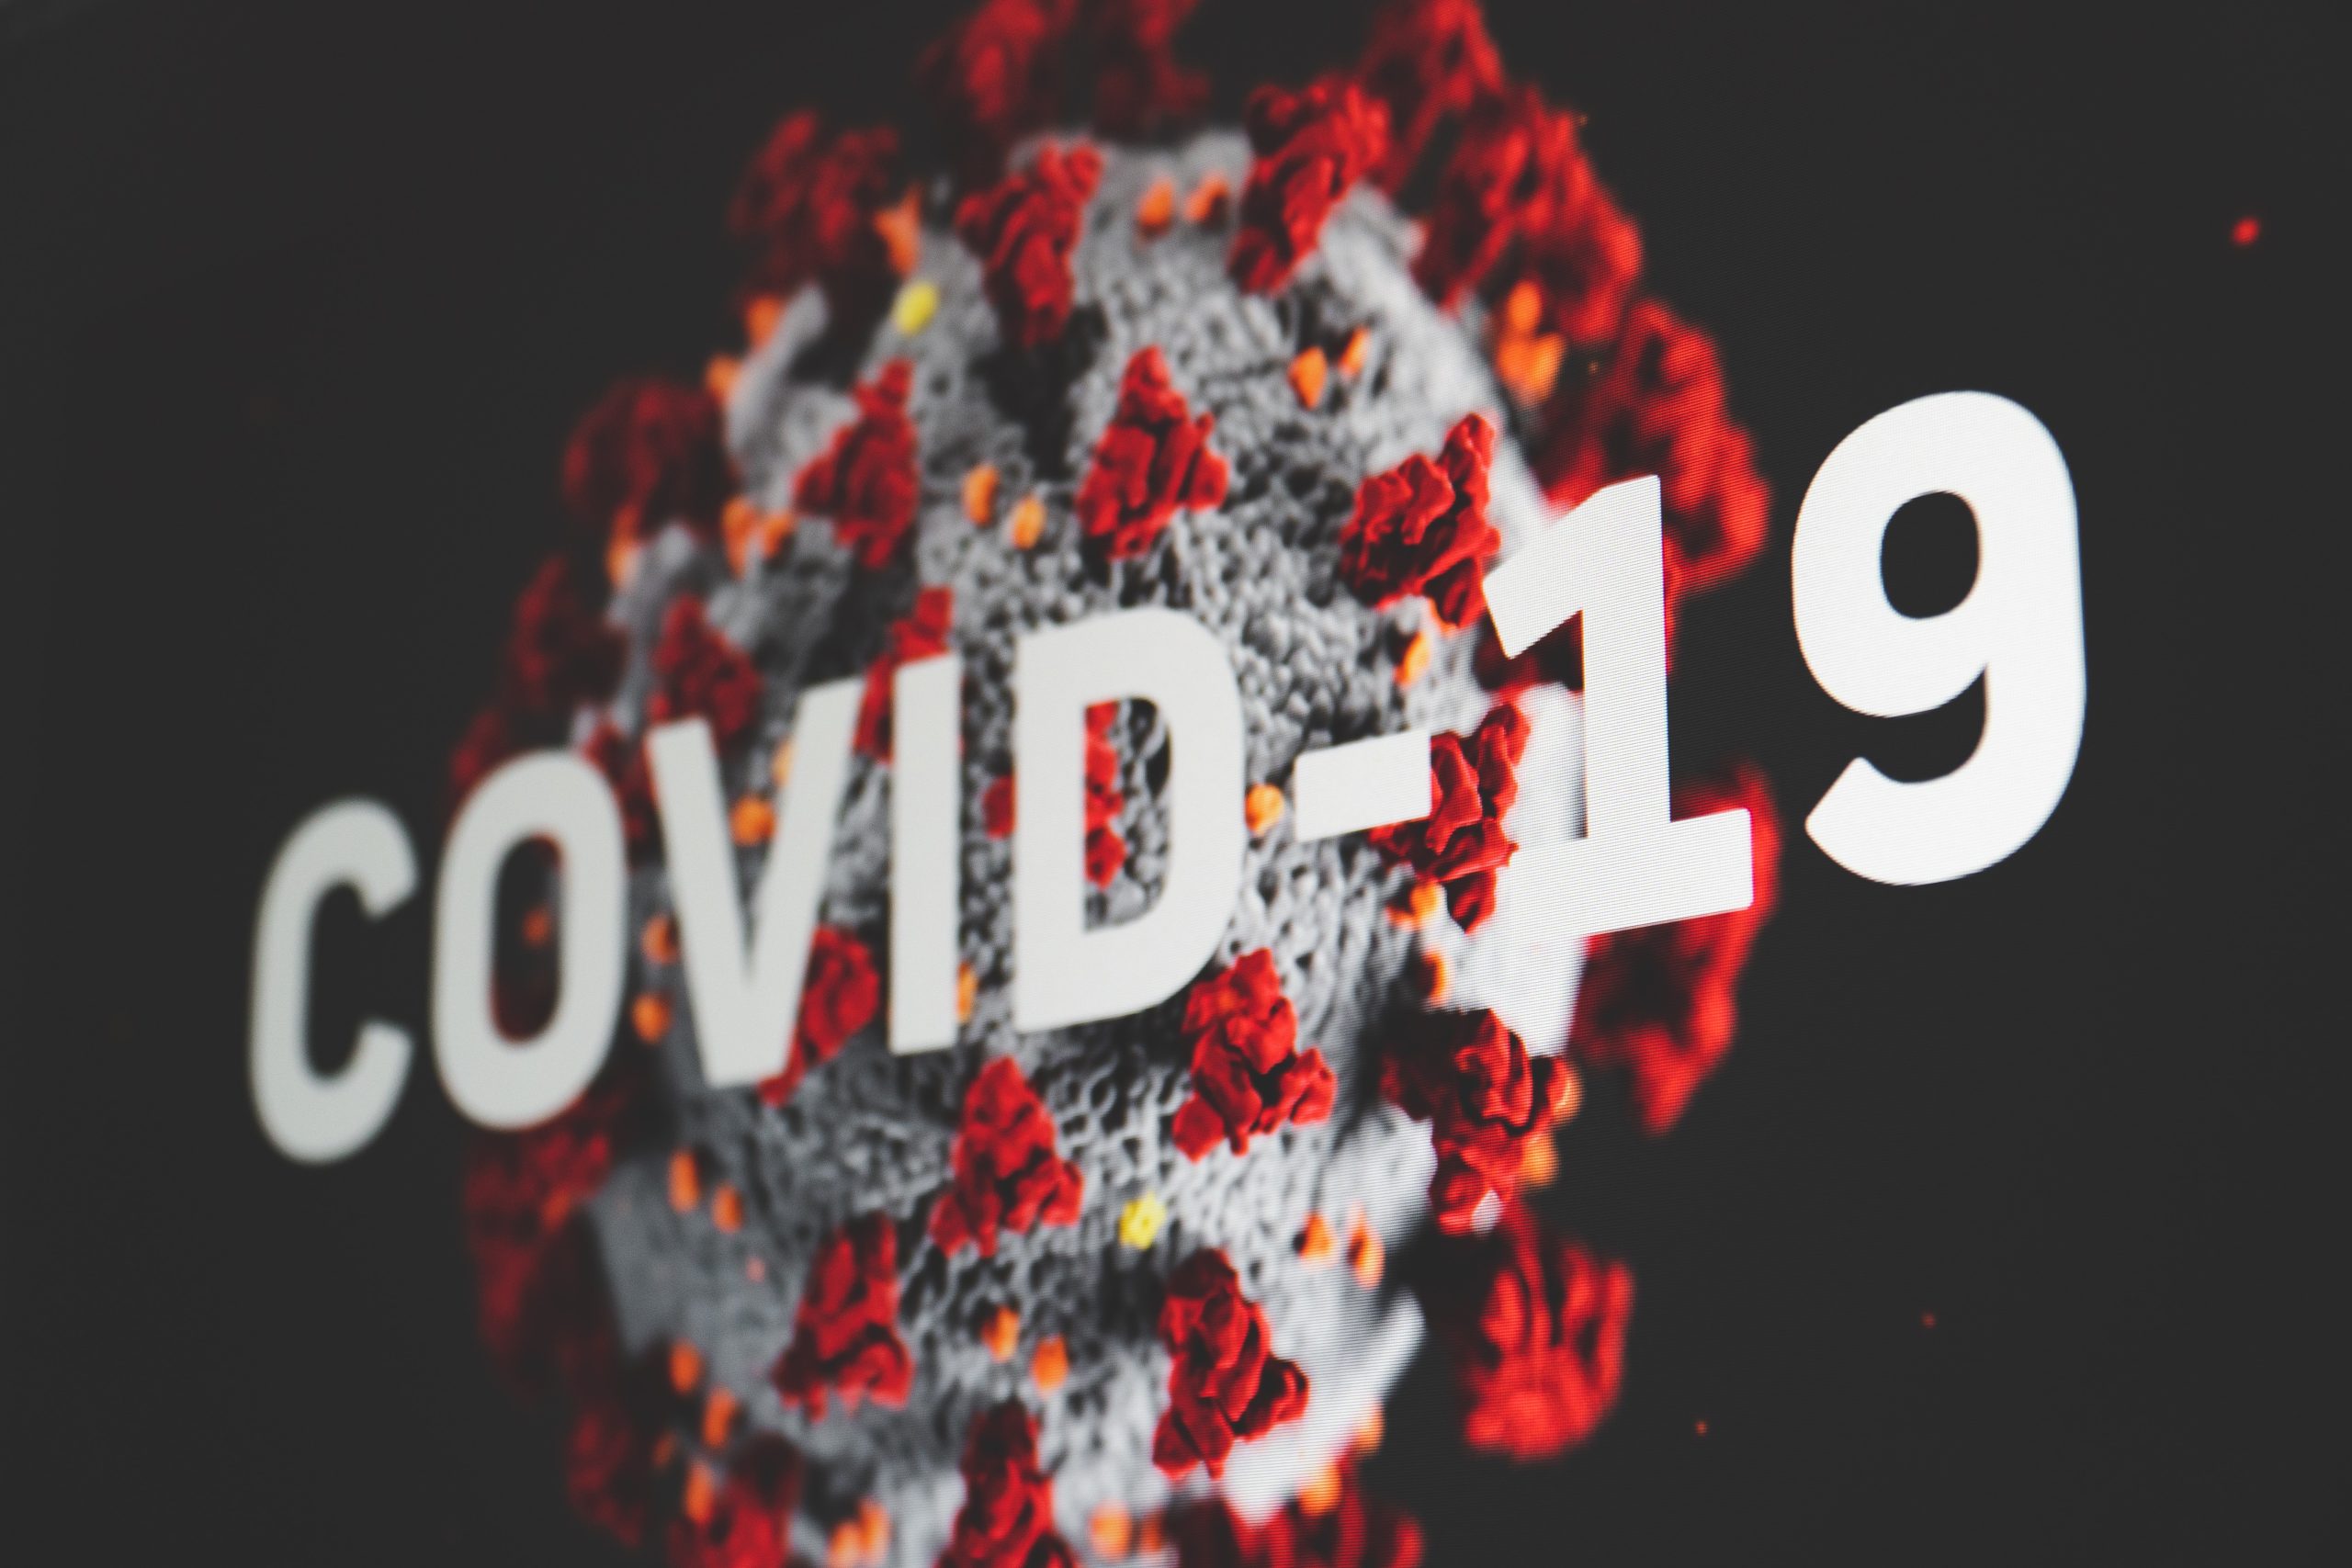 Simplx Prioritizes Health and Safety During COVID-19 Pandemic